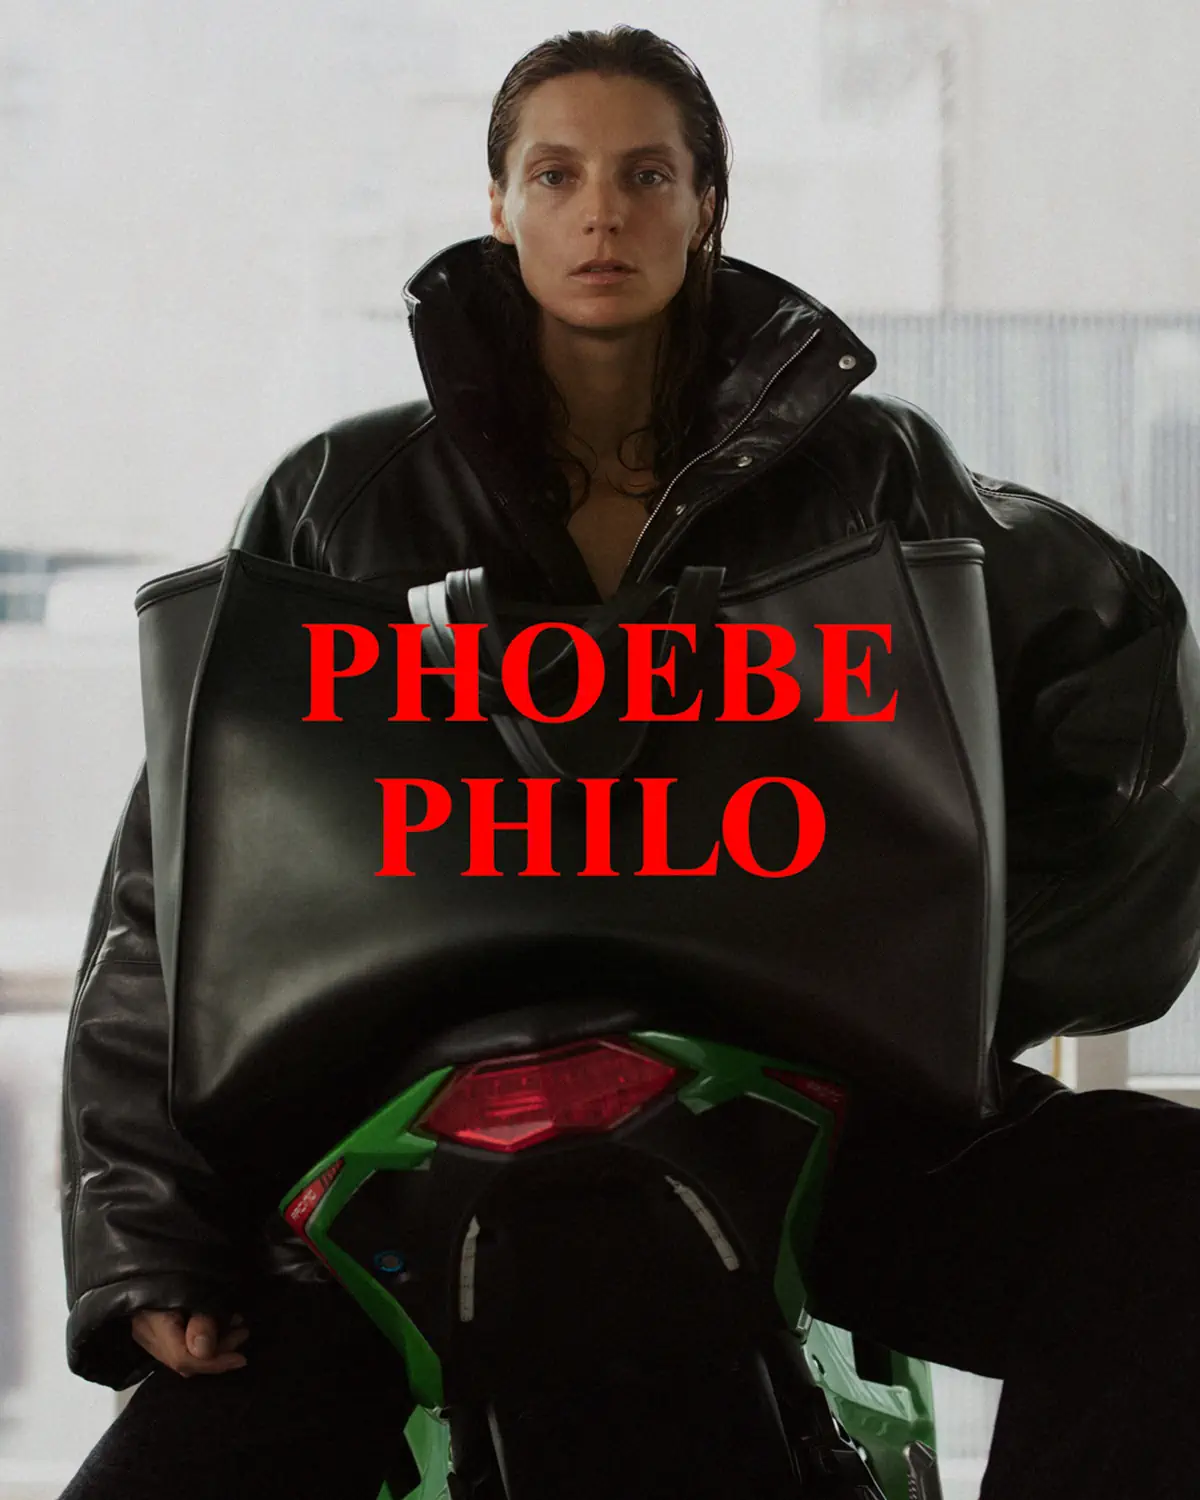 Phoebe Philo's New Collection Appears to Be Selling Out Rapidly – WWD